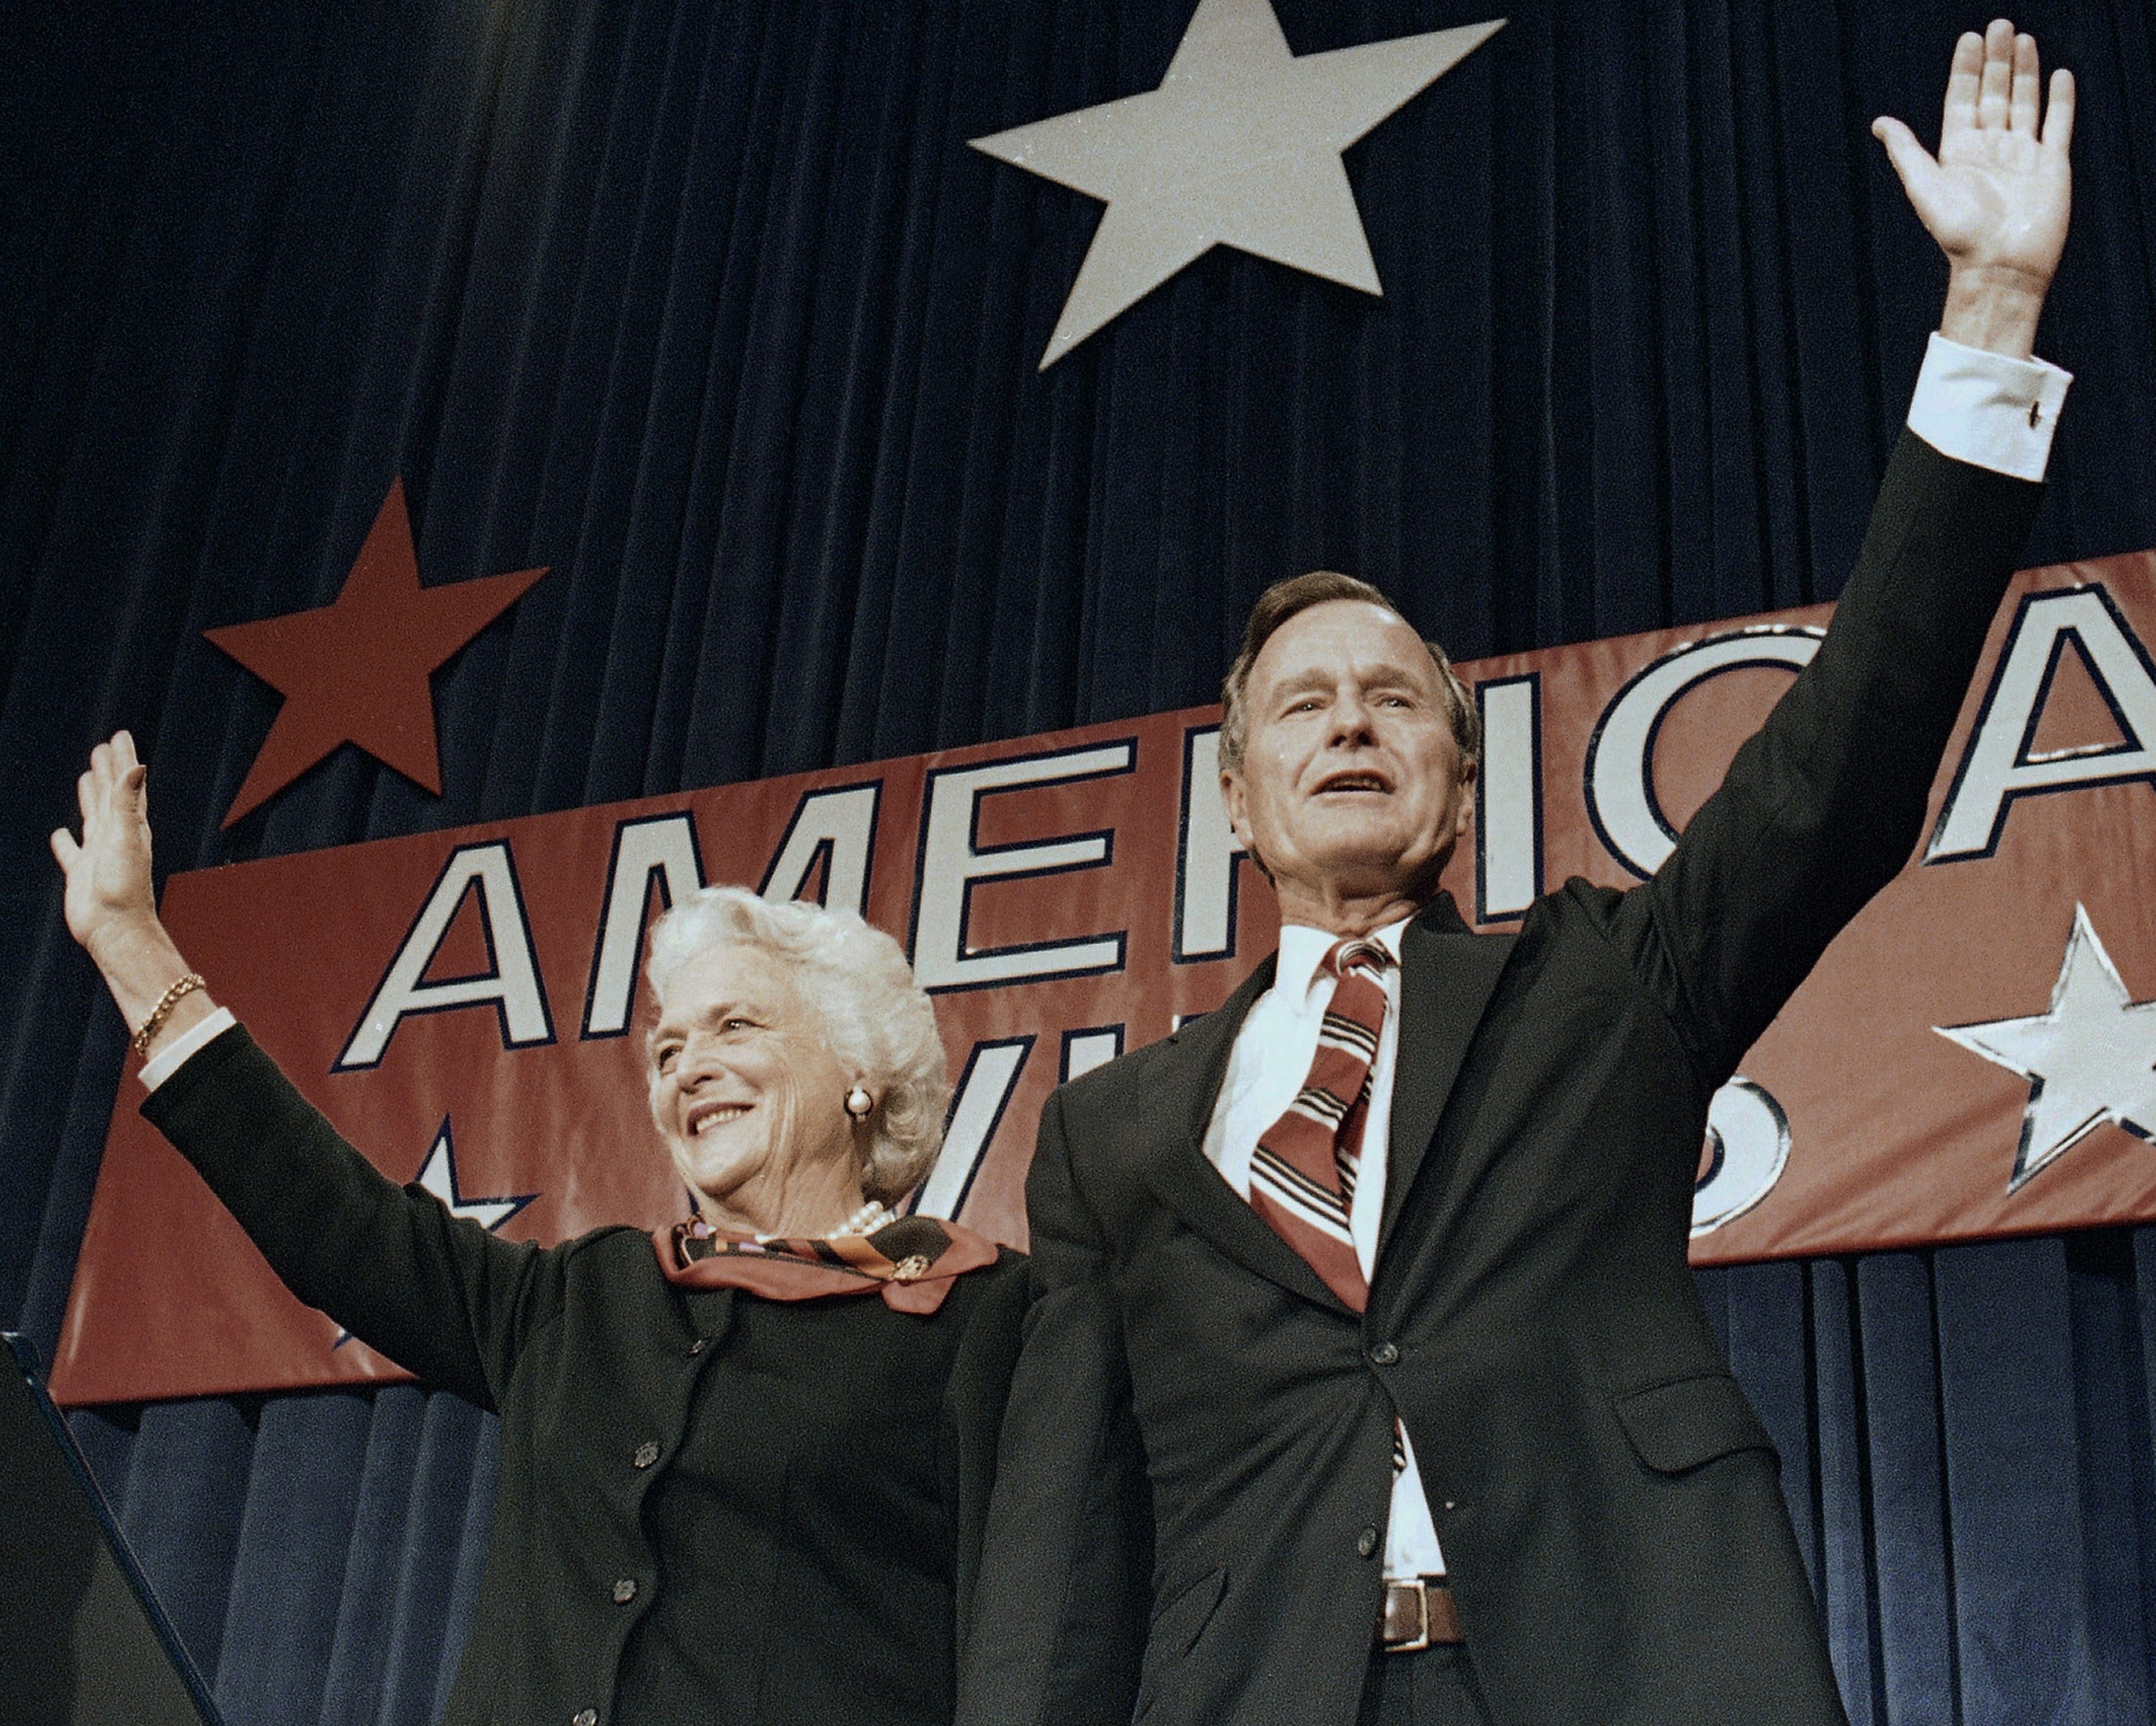 FILE - In this Nov. 8, 1988 file photo, President-elect George H.W. Bush and his wife Barbara wave to supporters in Houston, Texas after winning the presidential election. Bush has died at age 94. Family spokesman Jim McGrath says Bush died shortly after 10 p.m. Friday, Nov. 30, 2018, about eight months after the death of his wife, Barbara Bush.